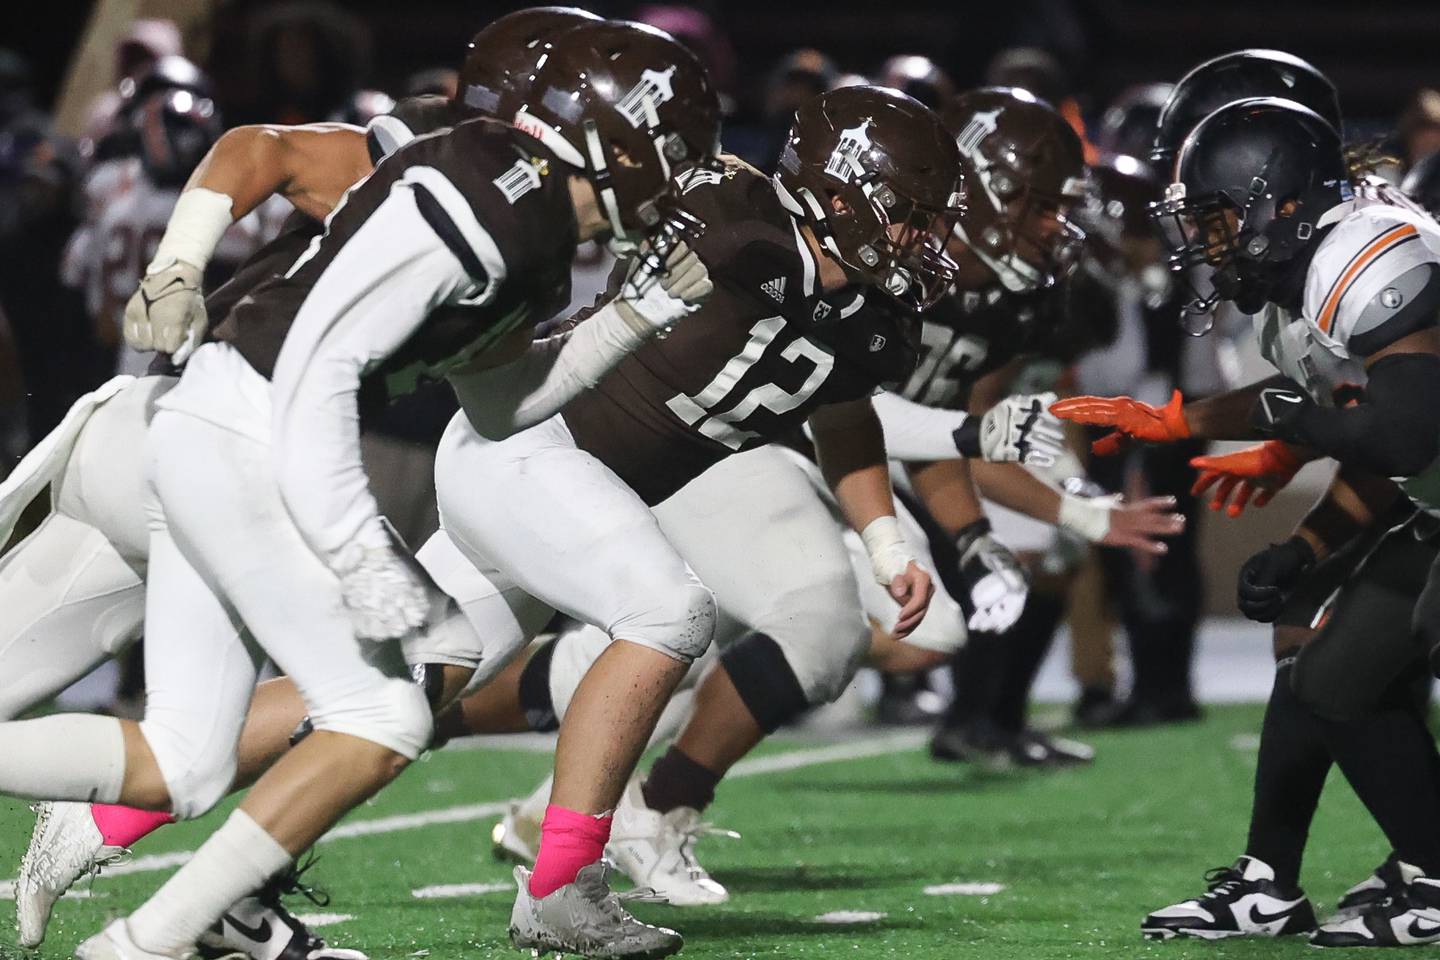 Joliet Catholic’s Zach Pomatto leads the rush on special teams against Leo on Friday, Oct. 6, 2023 in Joliet.